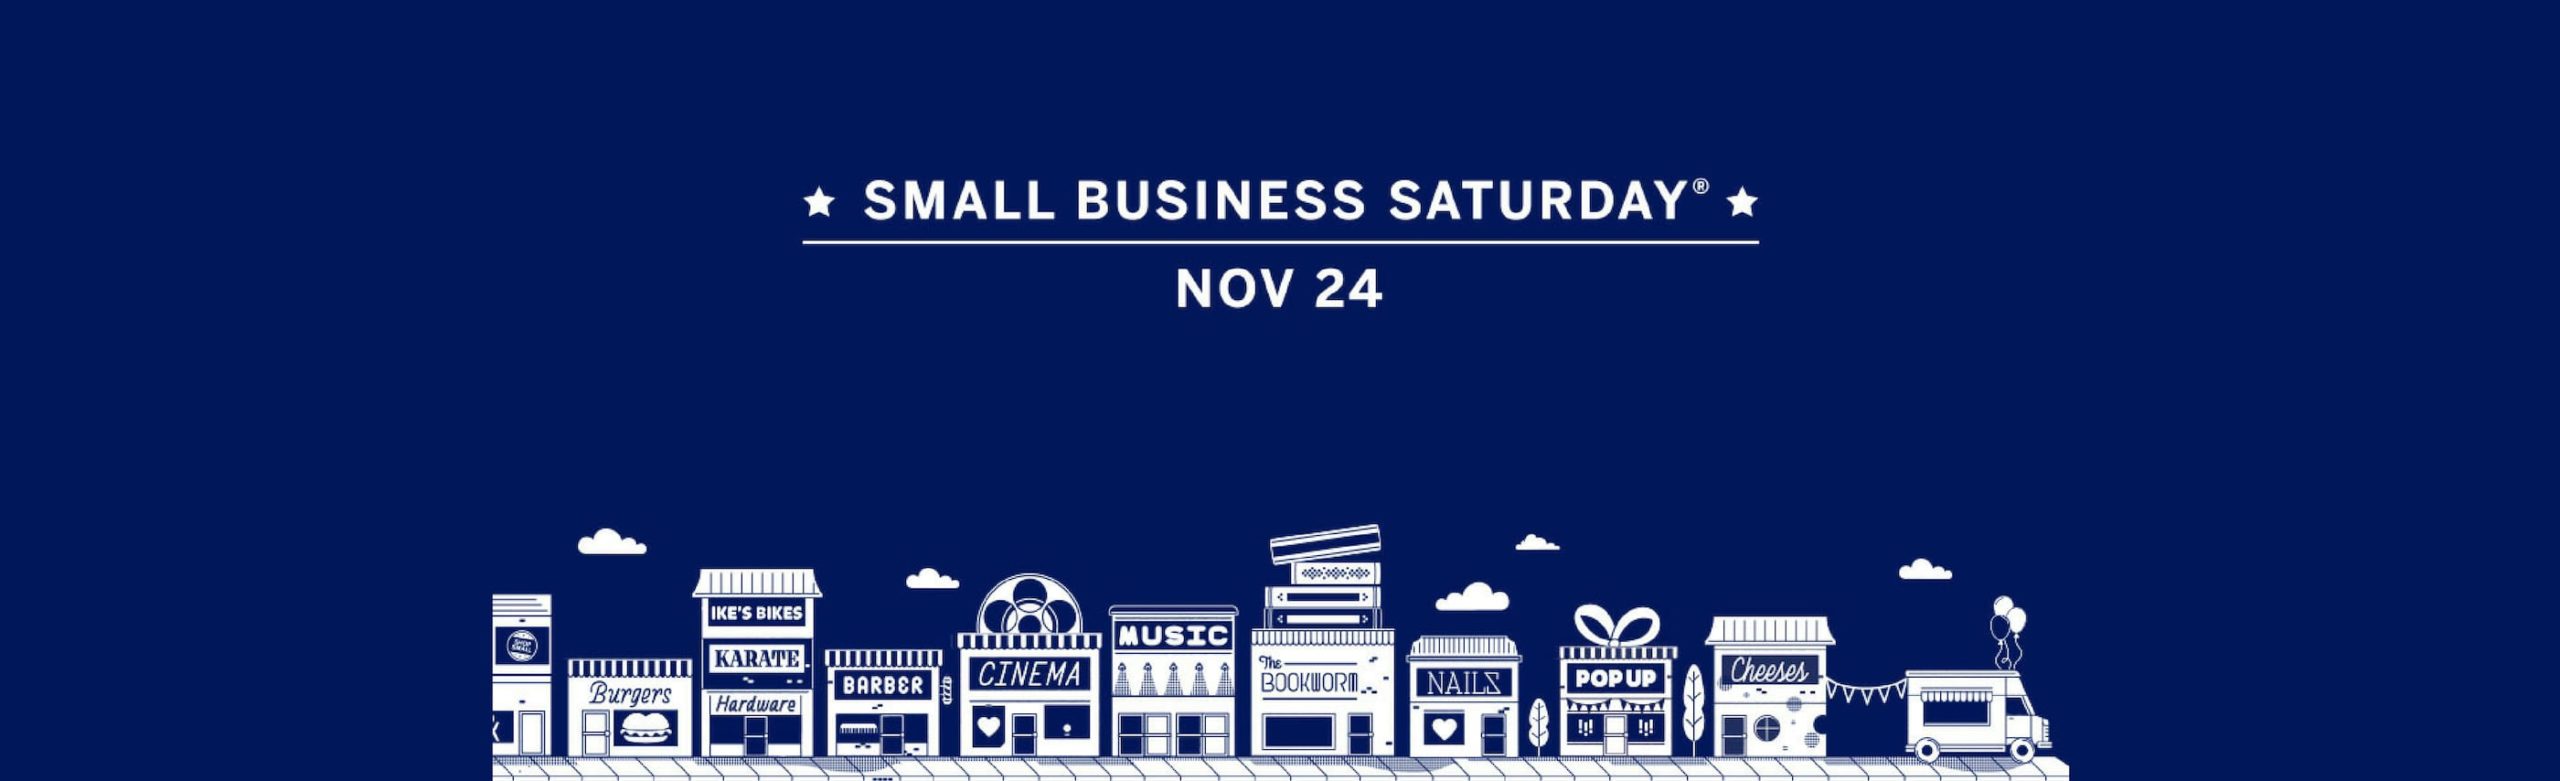 Win Tickets on Small Business Saturday 2018 Image